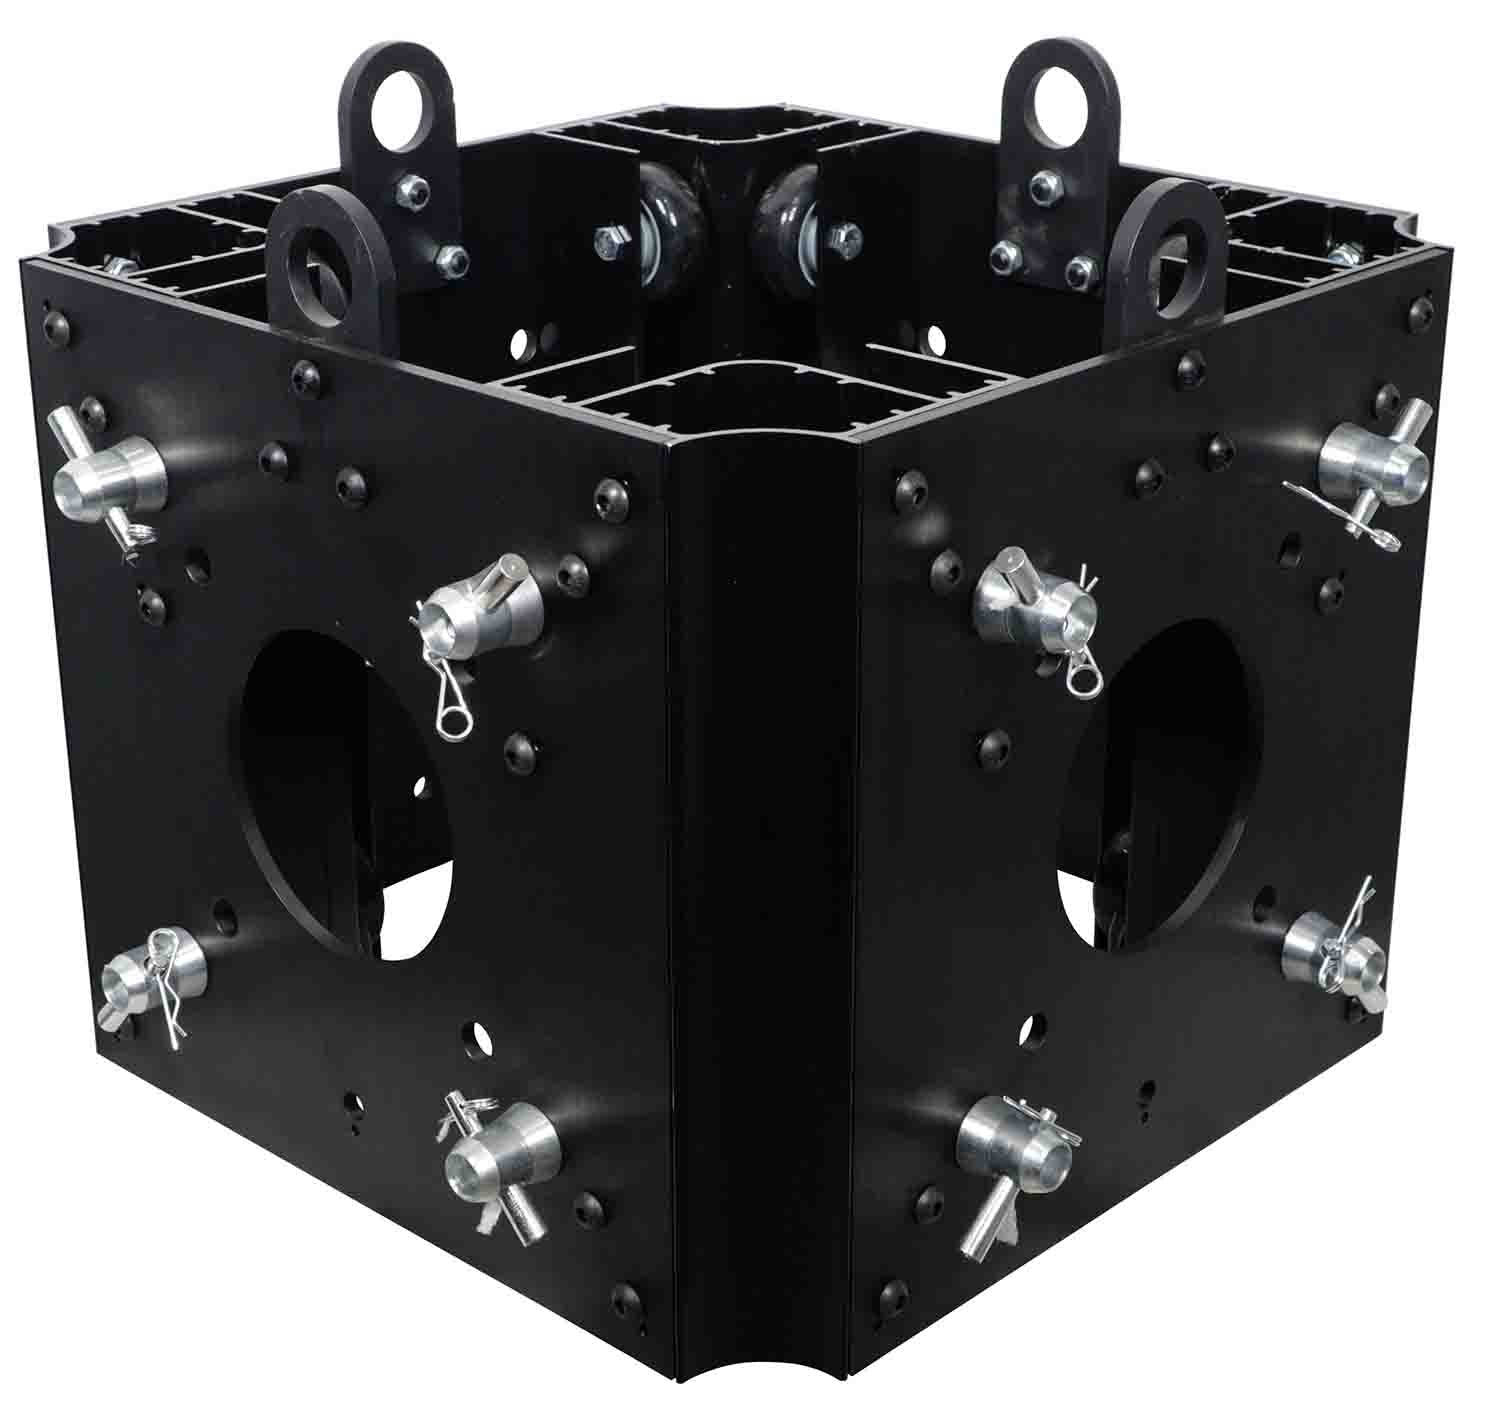 ProX XT-BLOCK-BLK Black Ground Support Sleeve Block for F34 Truss Systems - Hollywood DJ